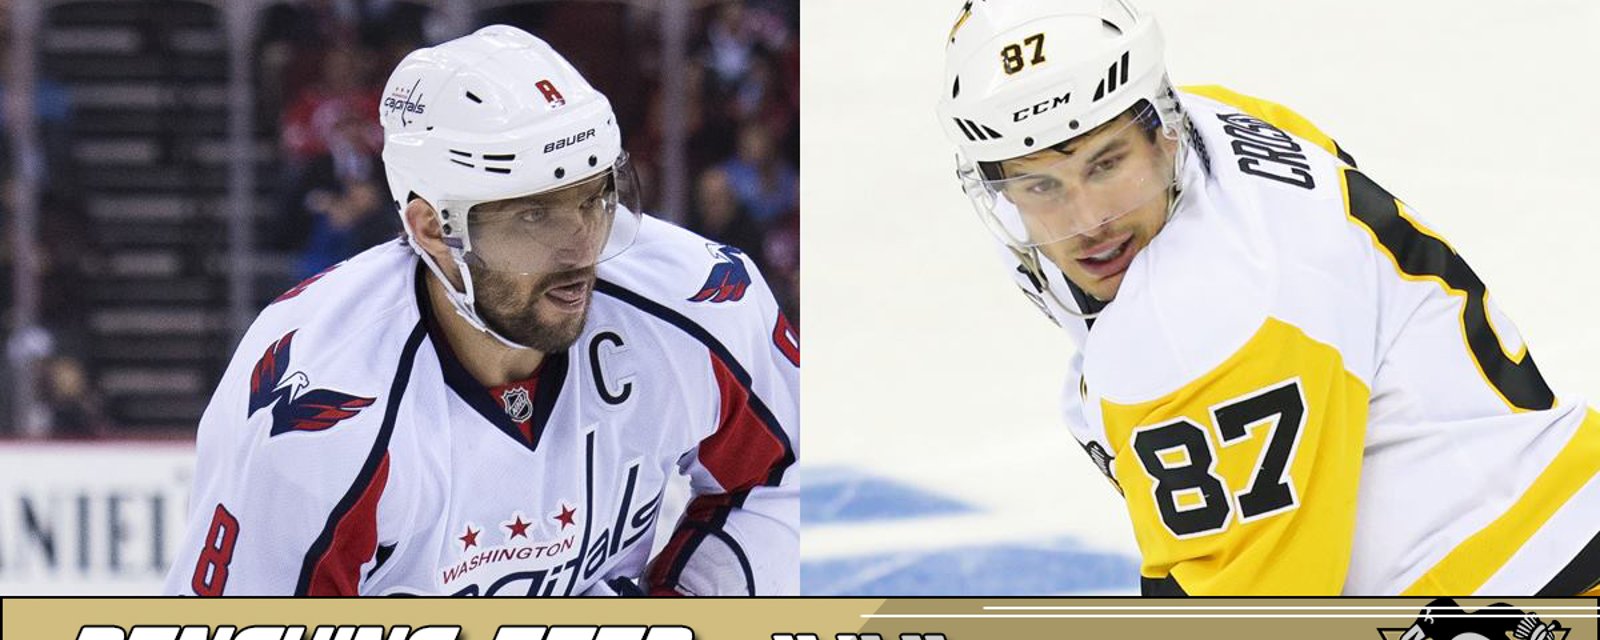 GOTTA SEE IT: Crosby/Ovechkin rivalry at its finest